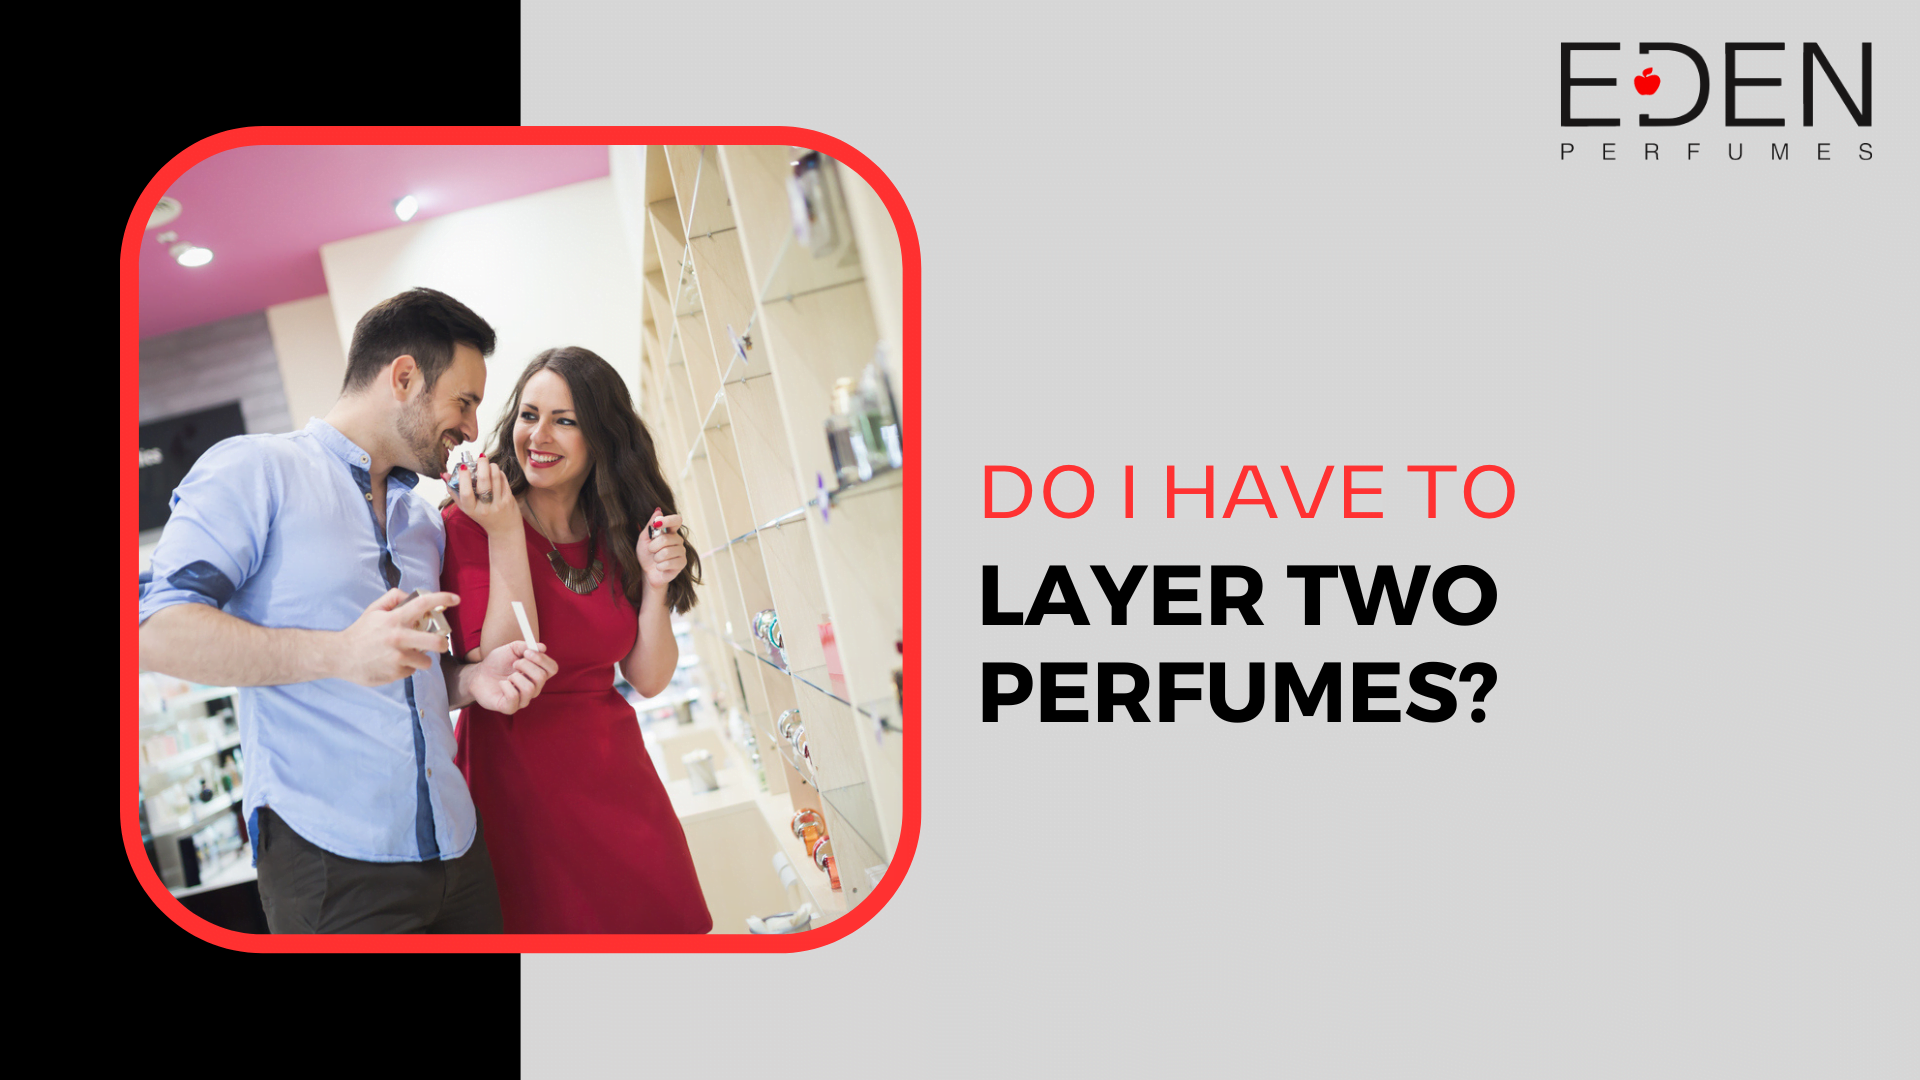 Do I have to layer two perfumes?